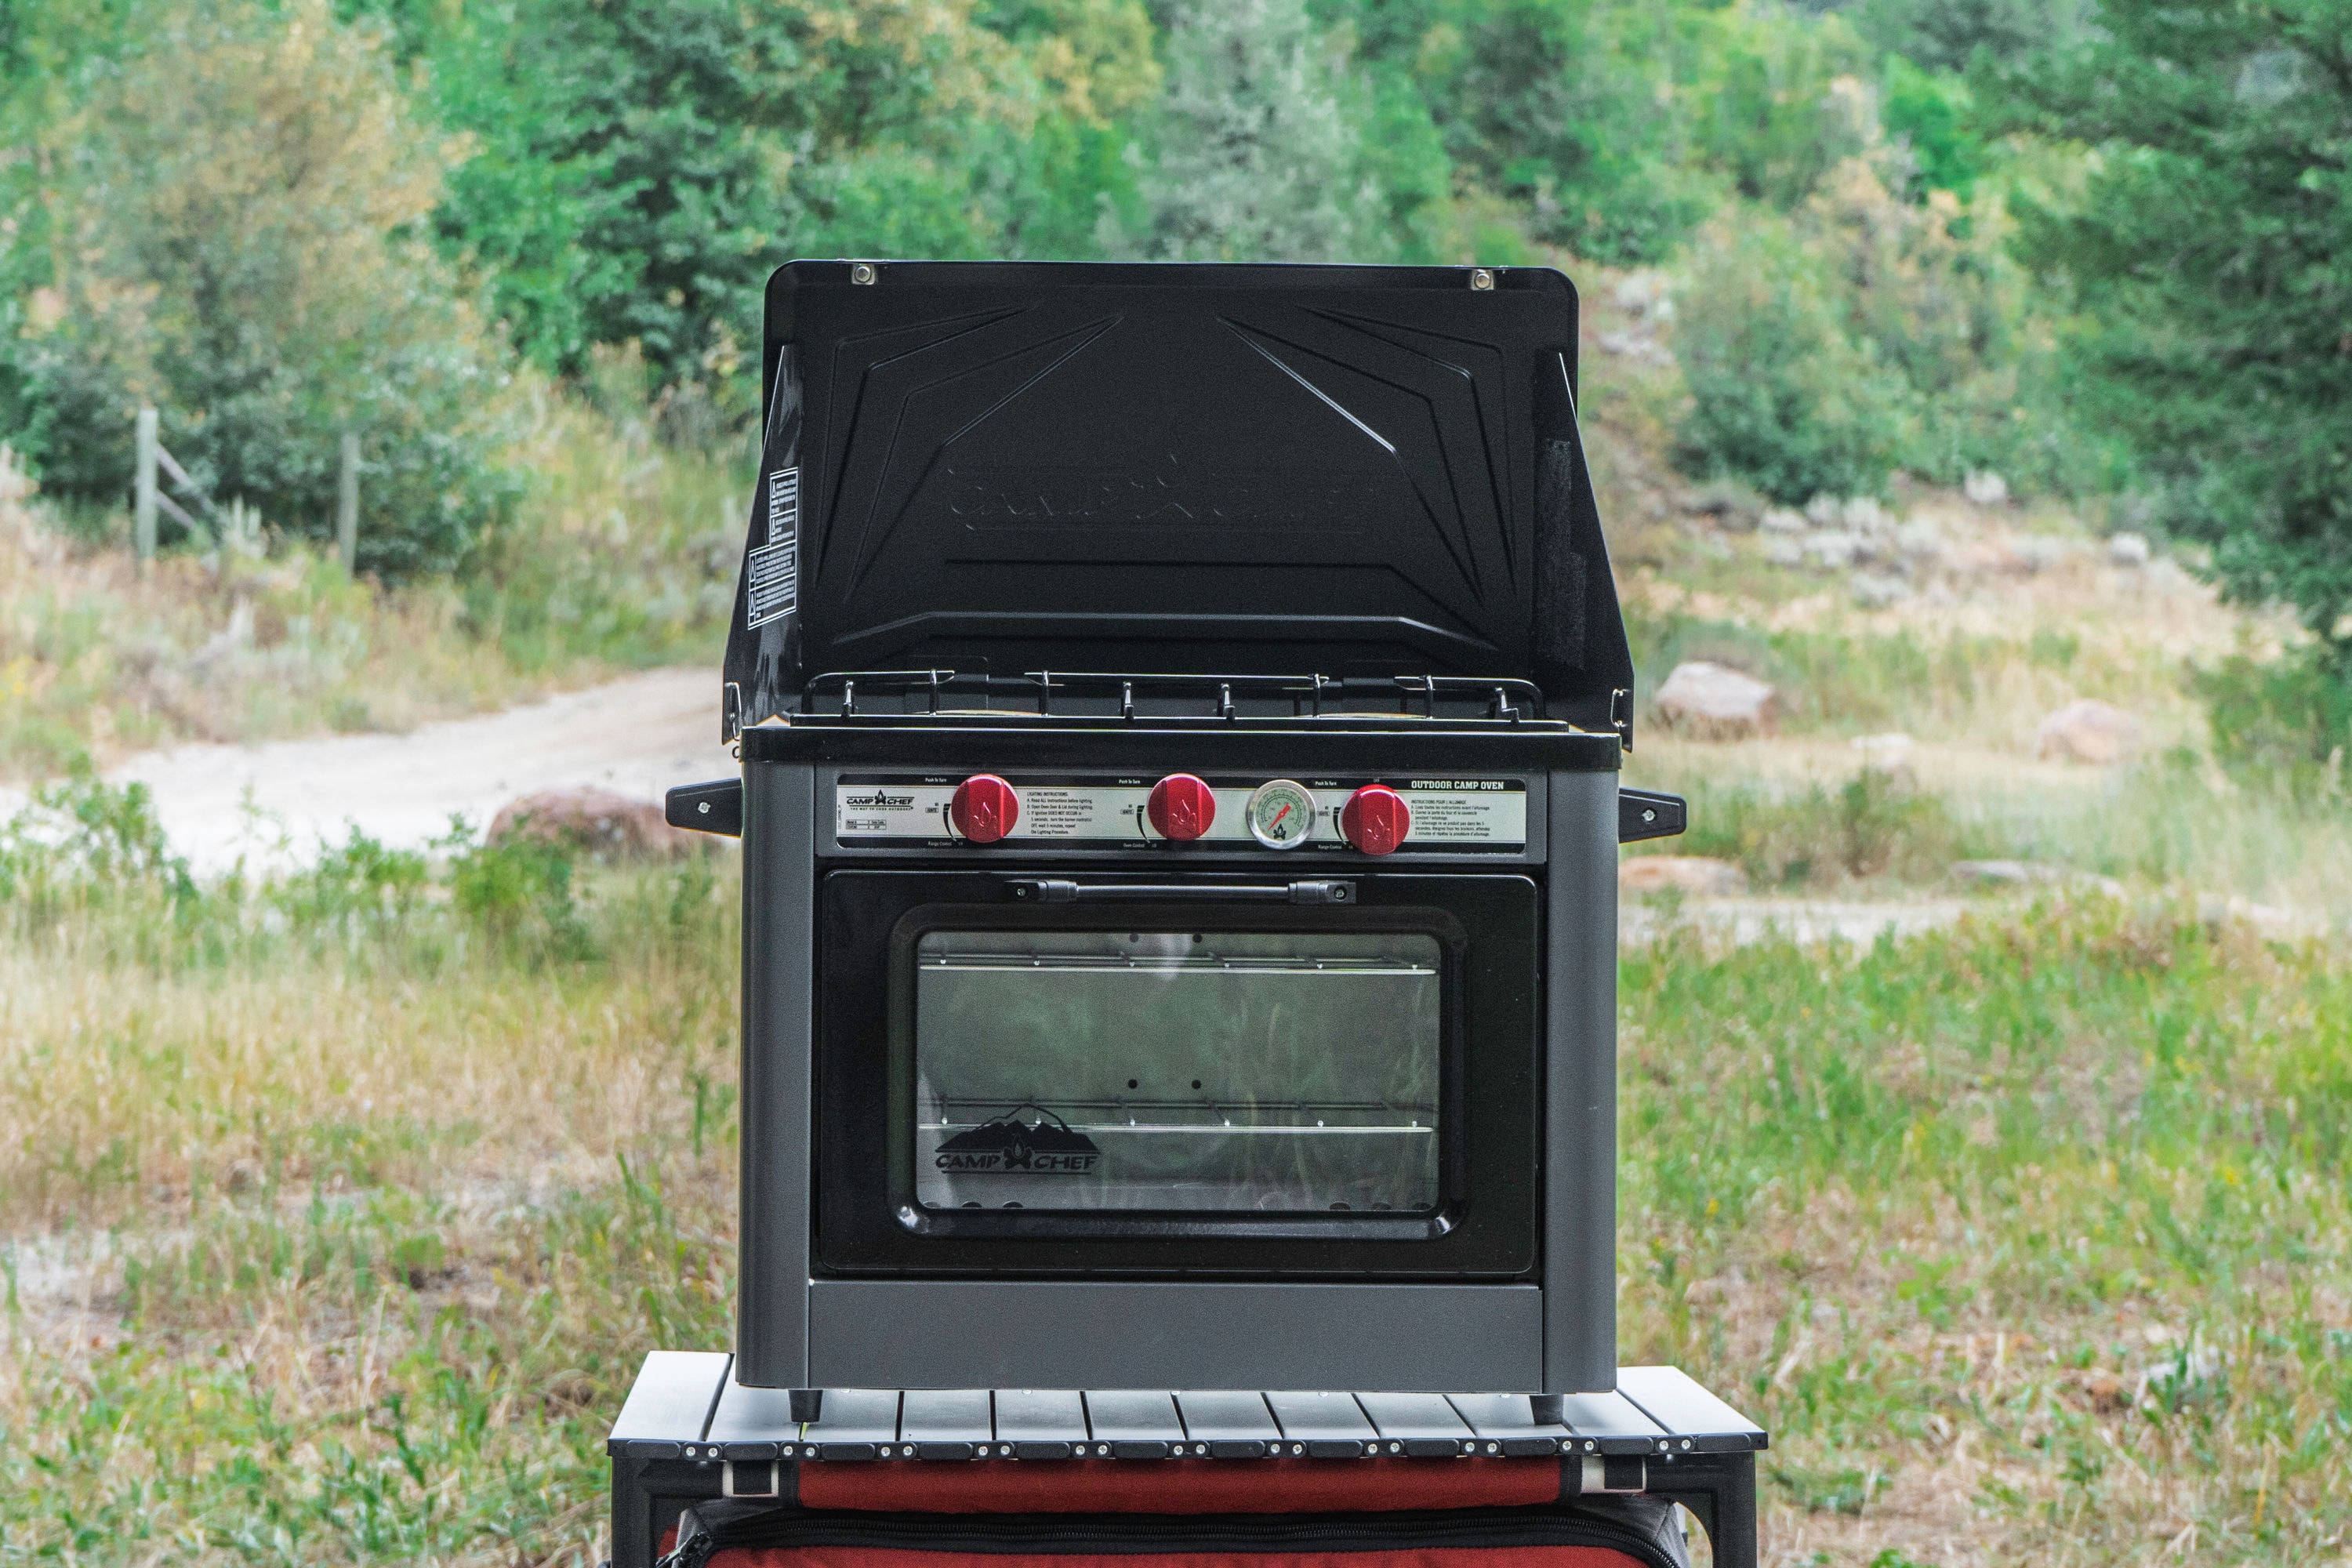  Camp Chef Outdoor Camp Oven, Dimensions with handles